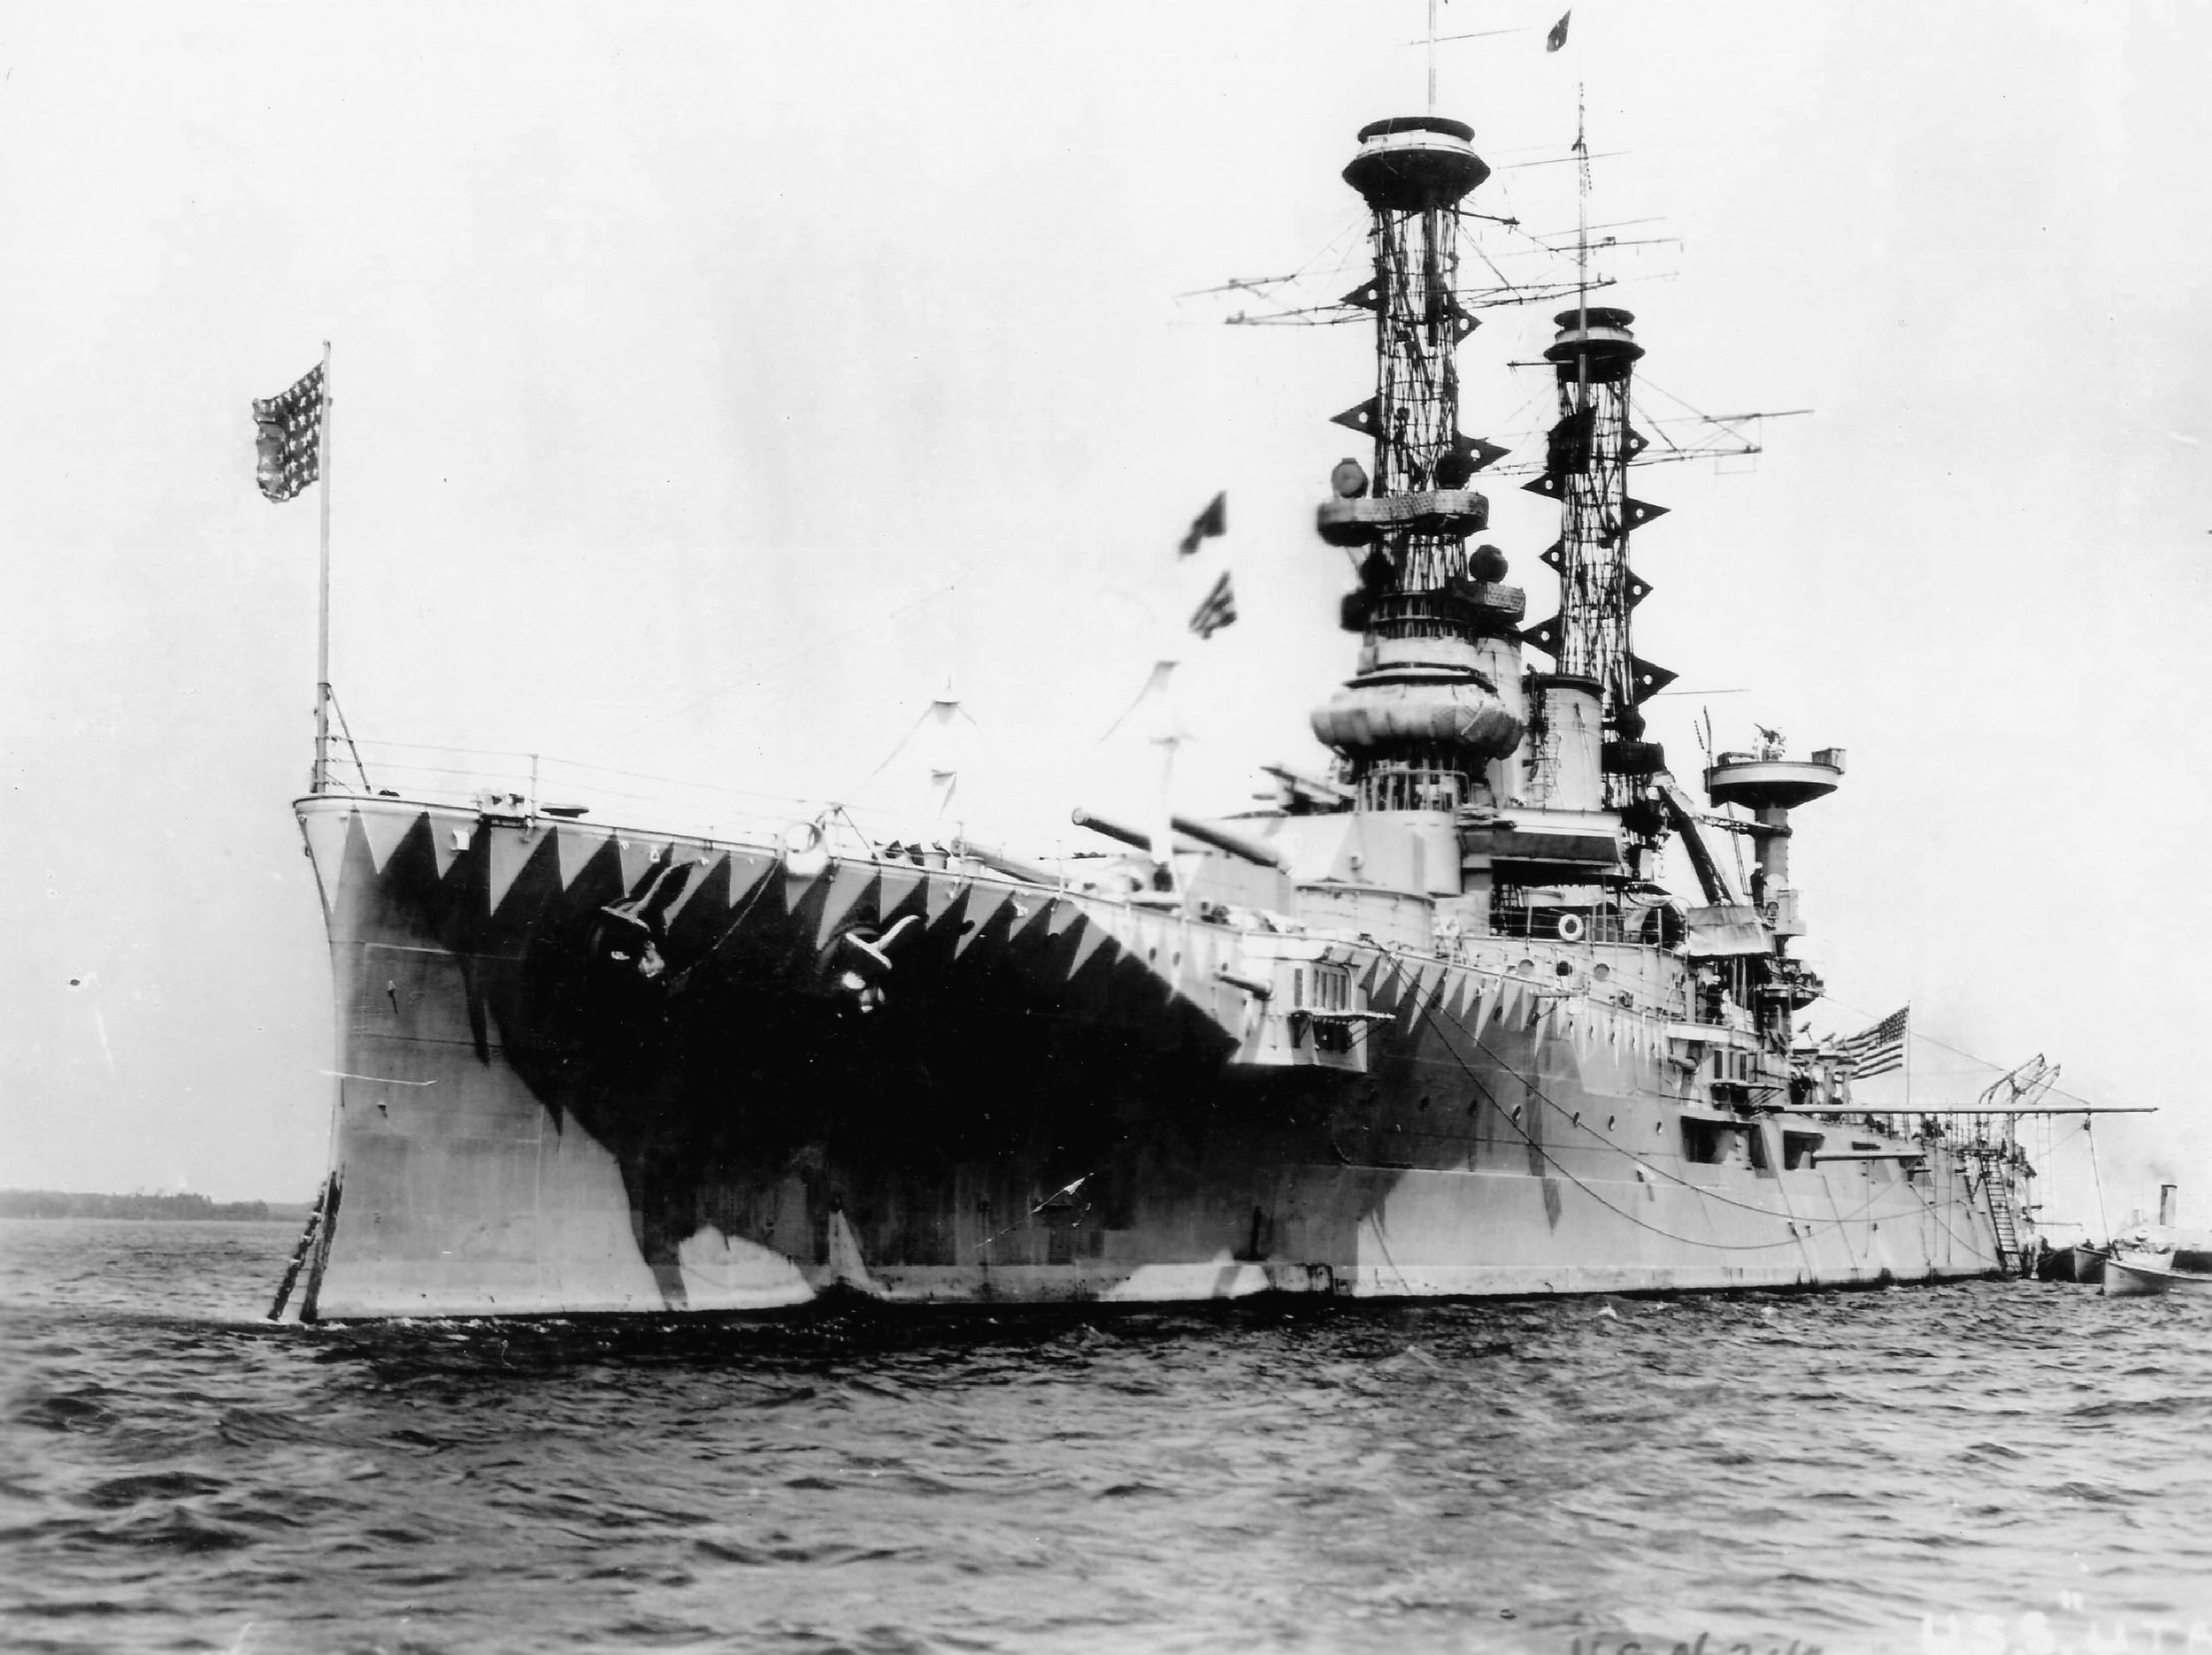 Converted to a target ship in 1930 , the battleship USS Utah is shown during World War I in a camouflage scheme intended to confuse the enemy range finders.